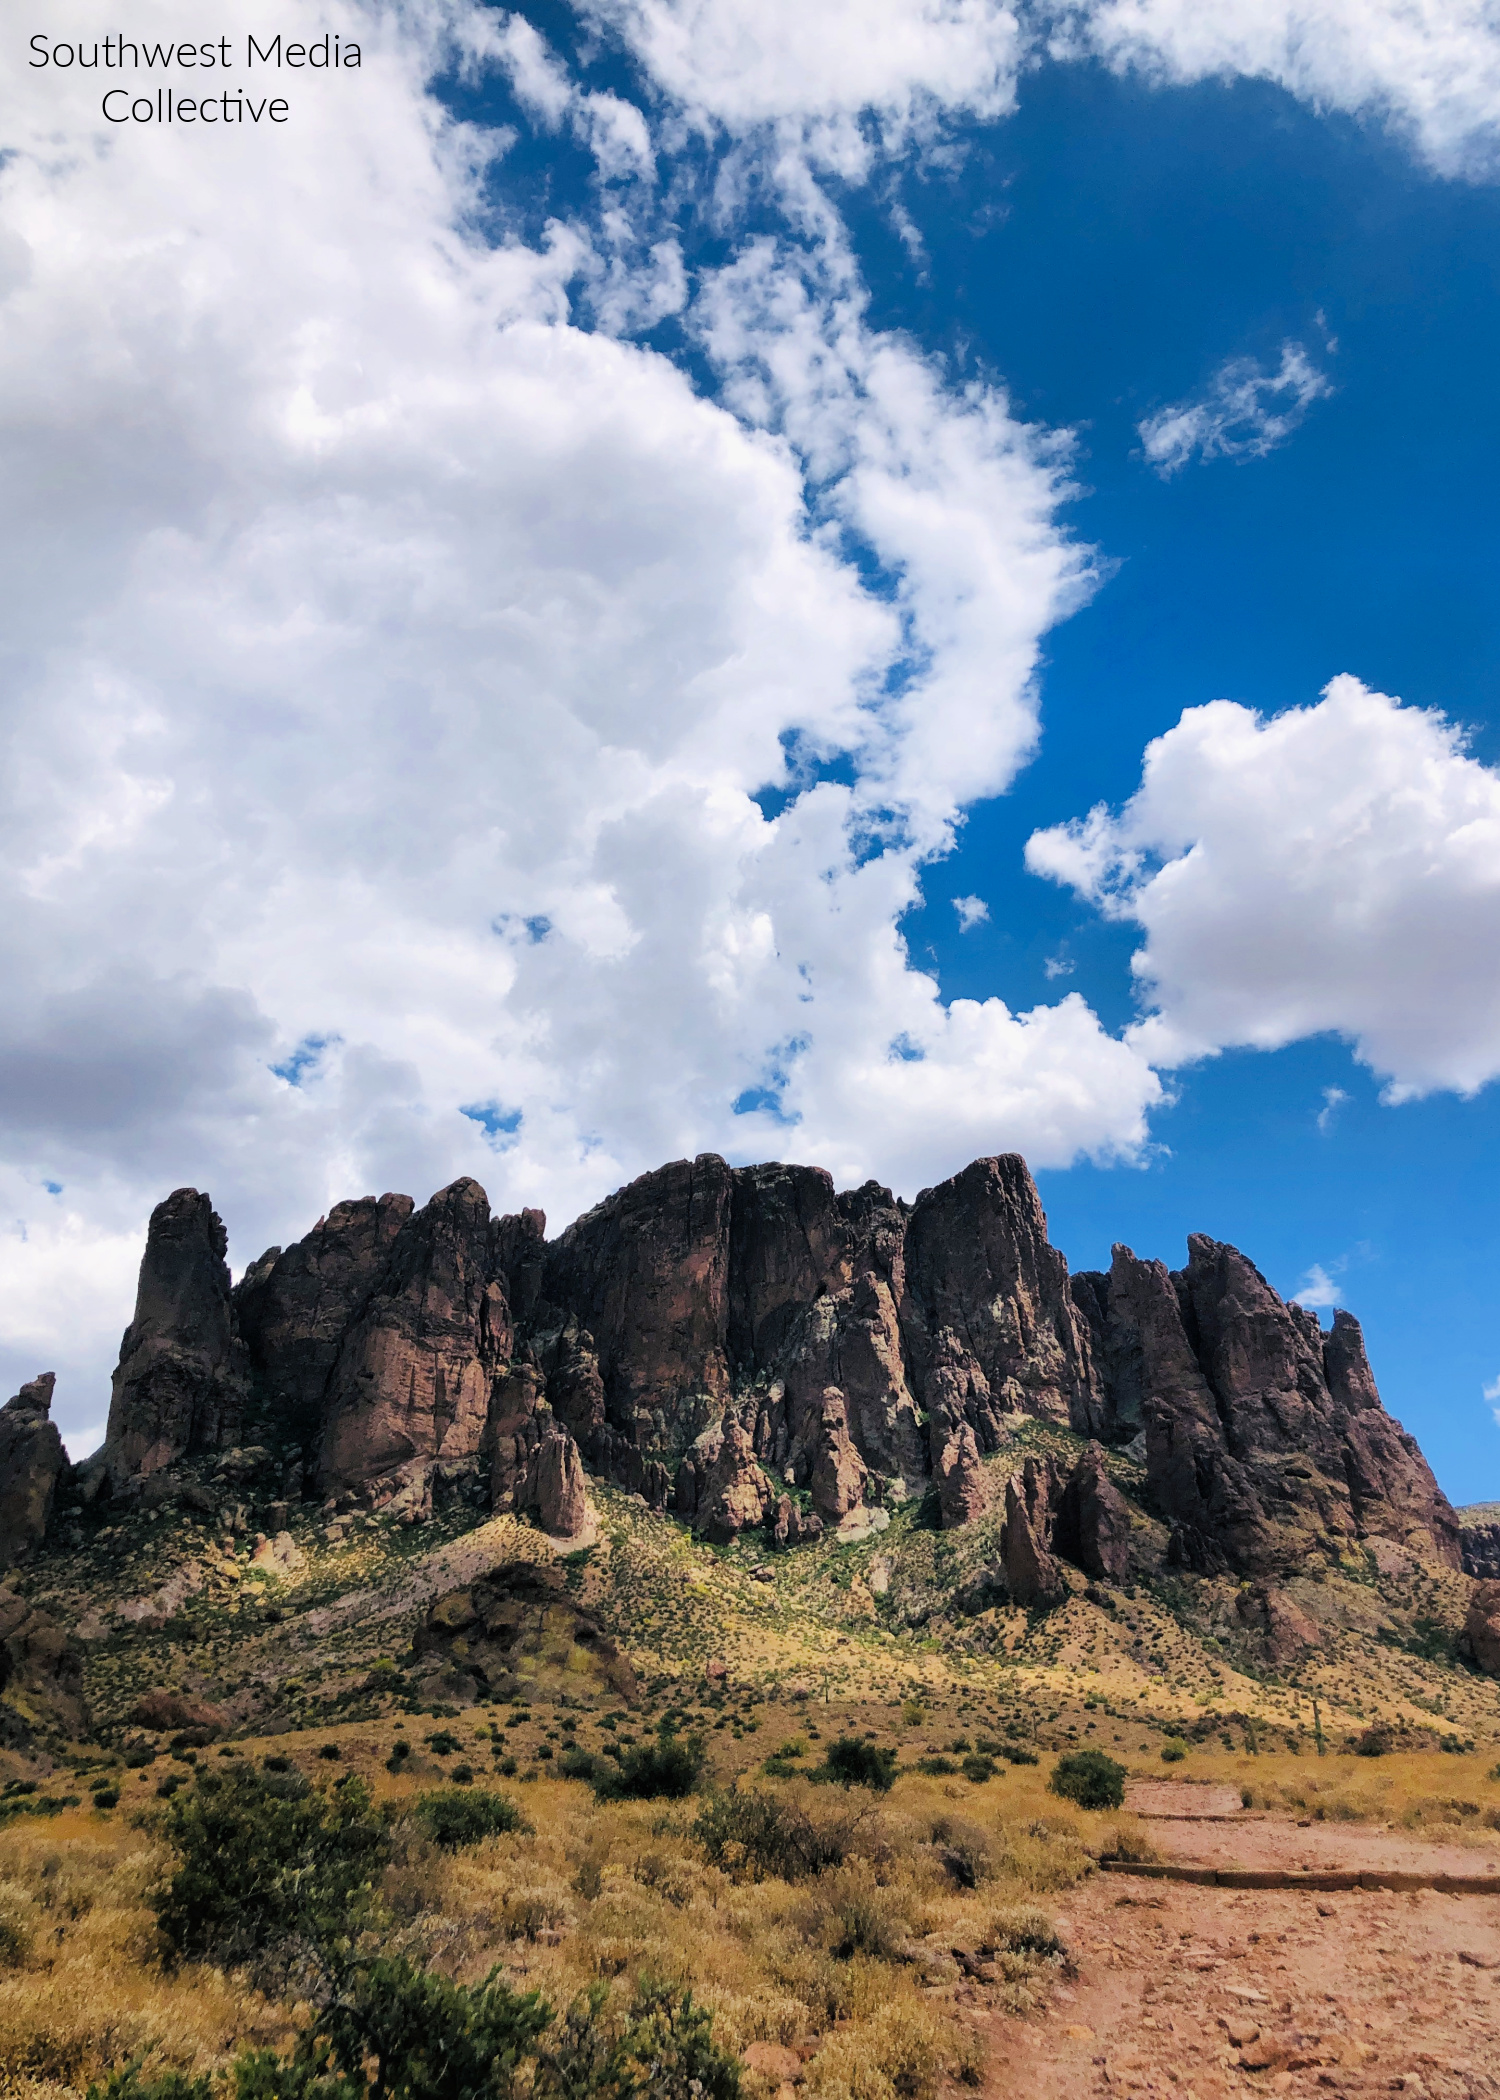 Prospector Trail is a family-friendly, 3 mile hike in the Far East Valley of the Superstition Mountains, Arizona - the trail is beautiful at any time of the year!